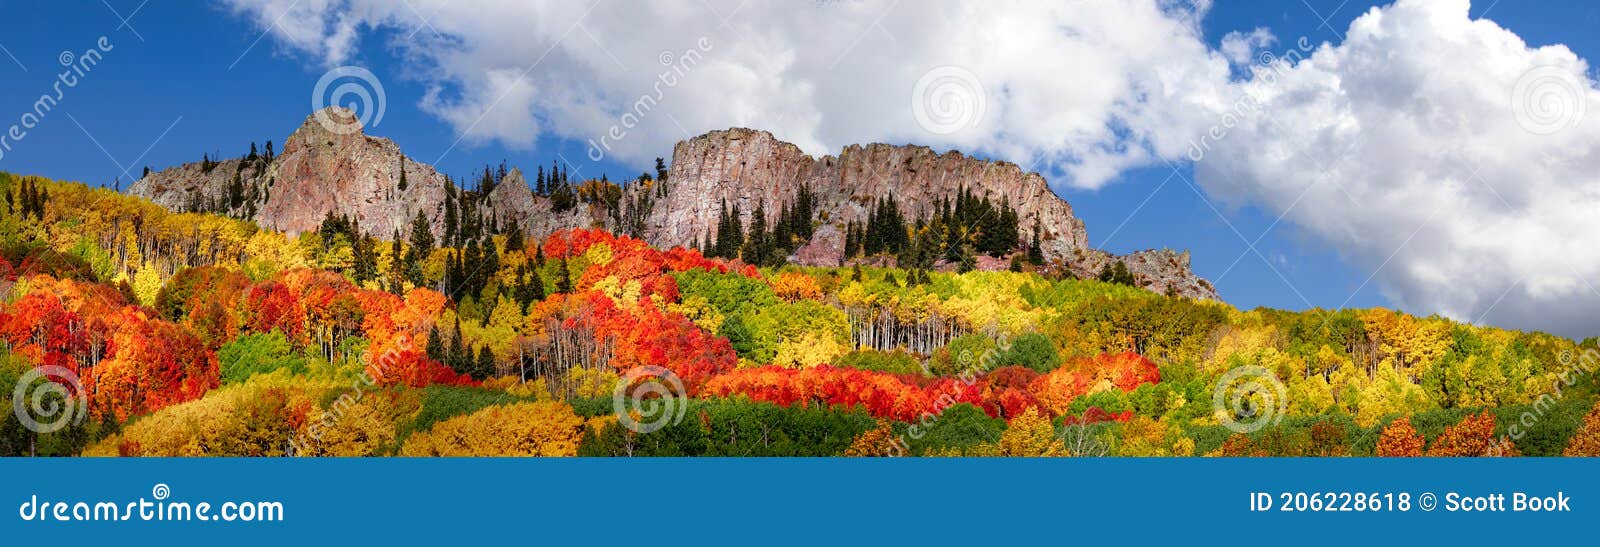 autumn landscape in the rocky mountains